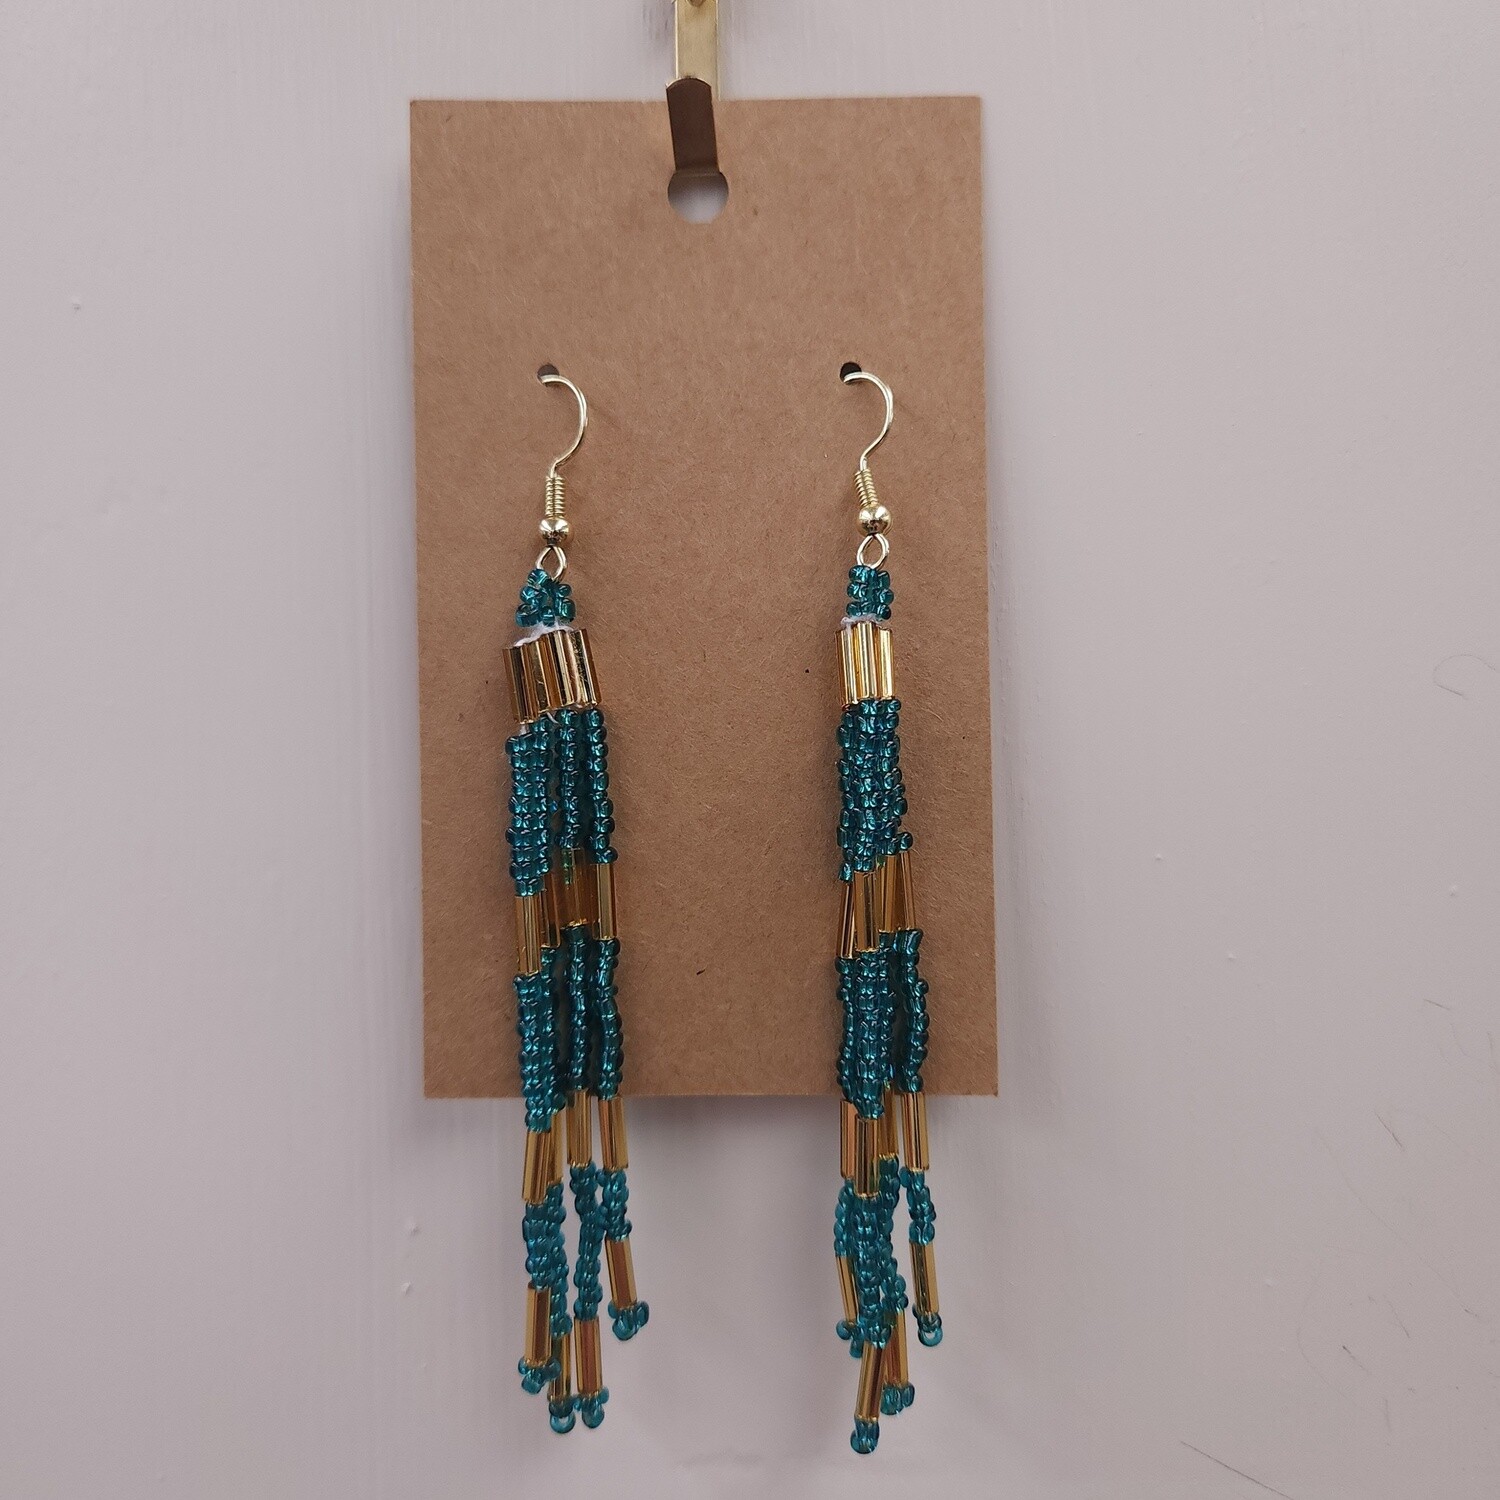 Teal and Gold Earrings